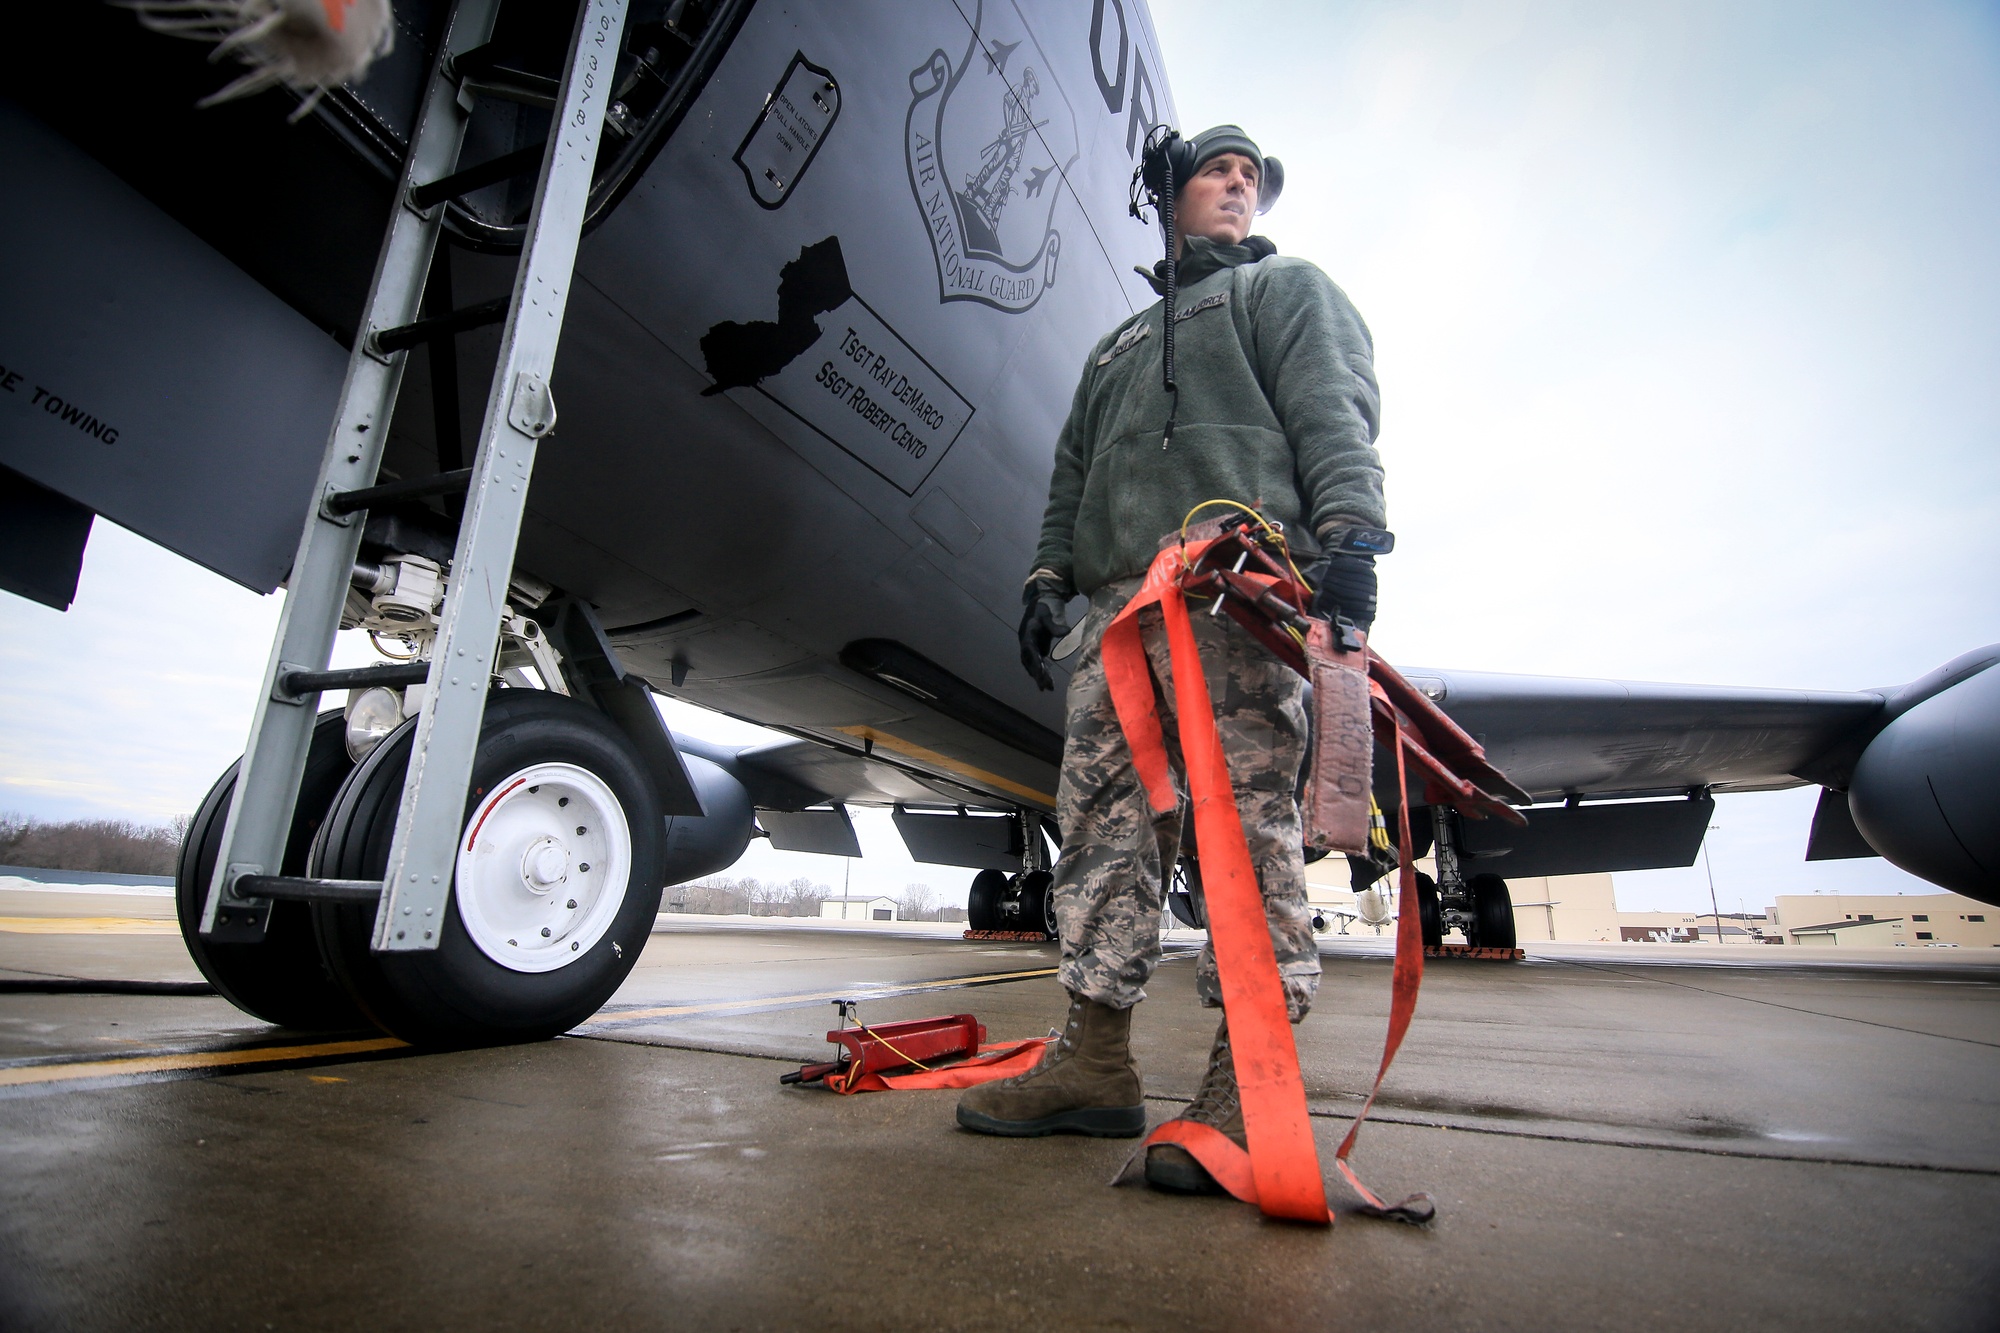 Images - Remove before flight [Image 11 of 16] - DVIDS